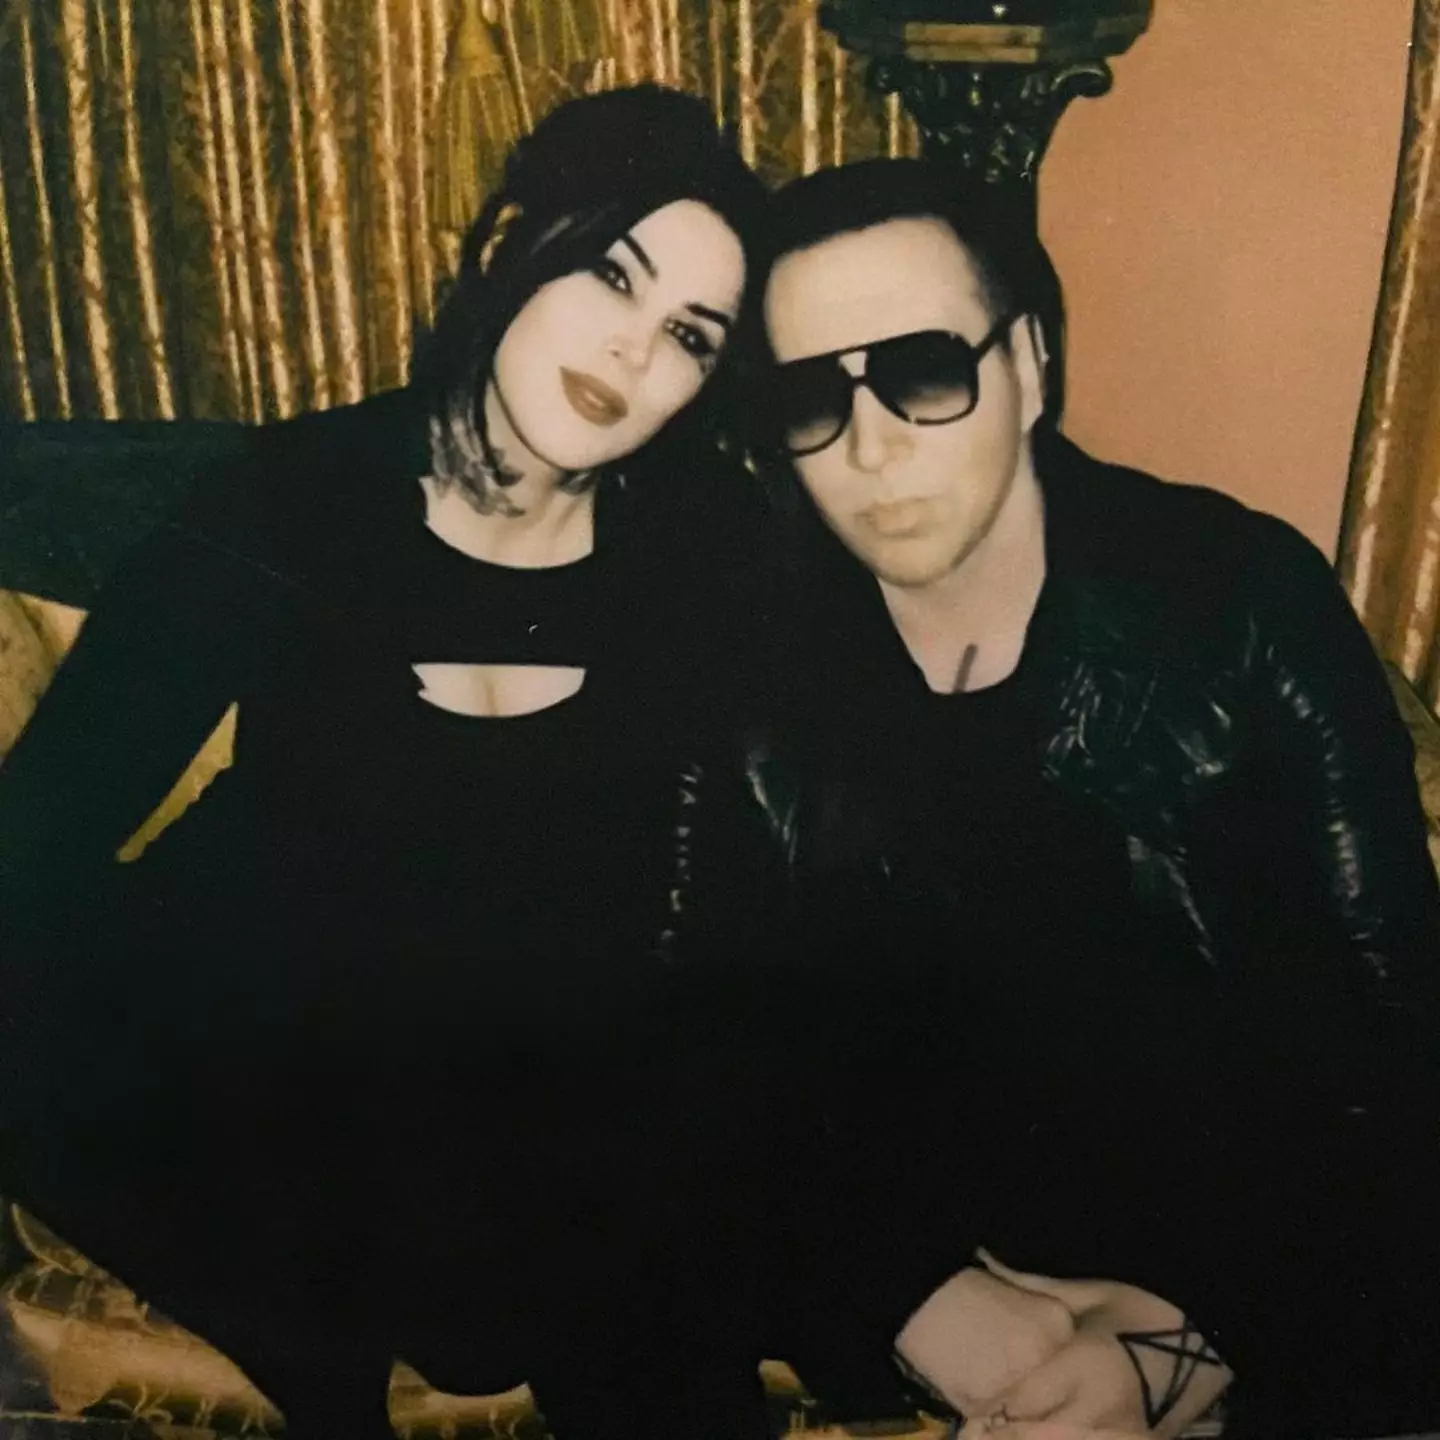 Kat Von D is working on a new project with the singer.